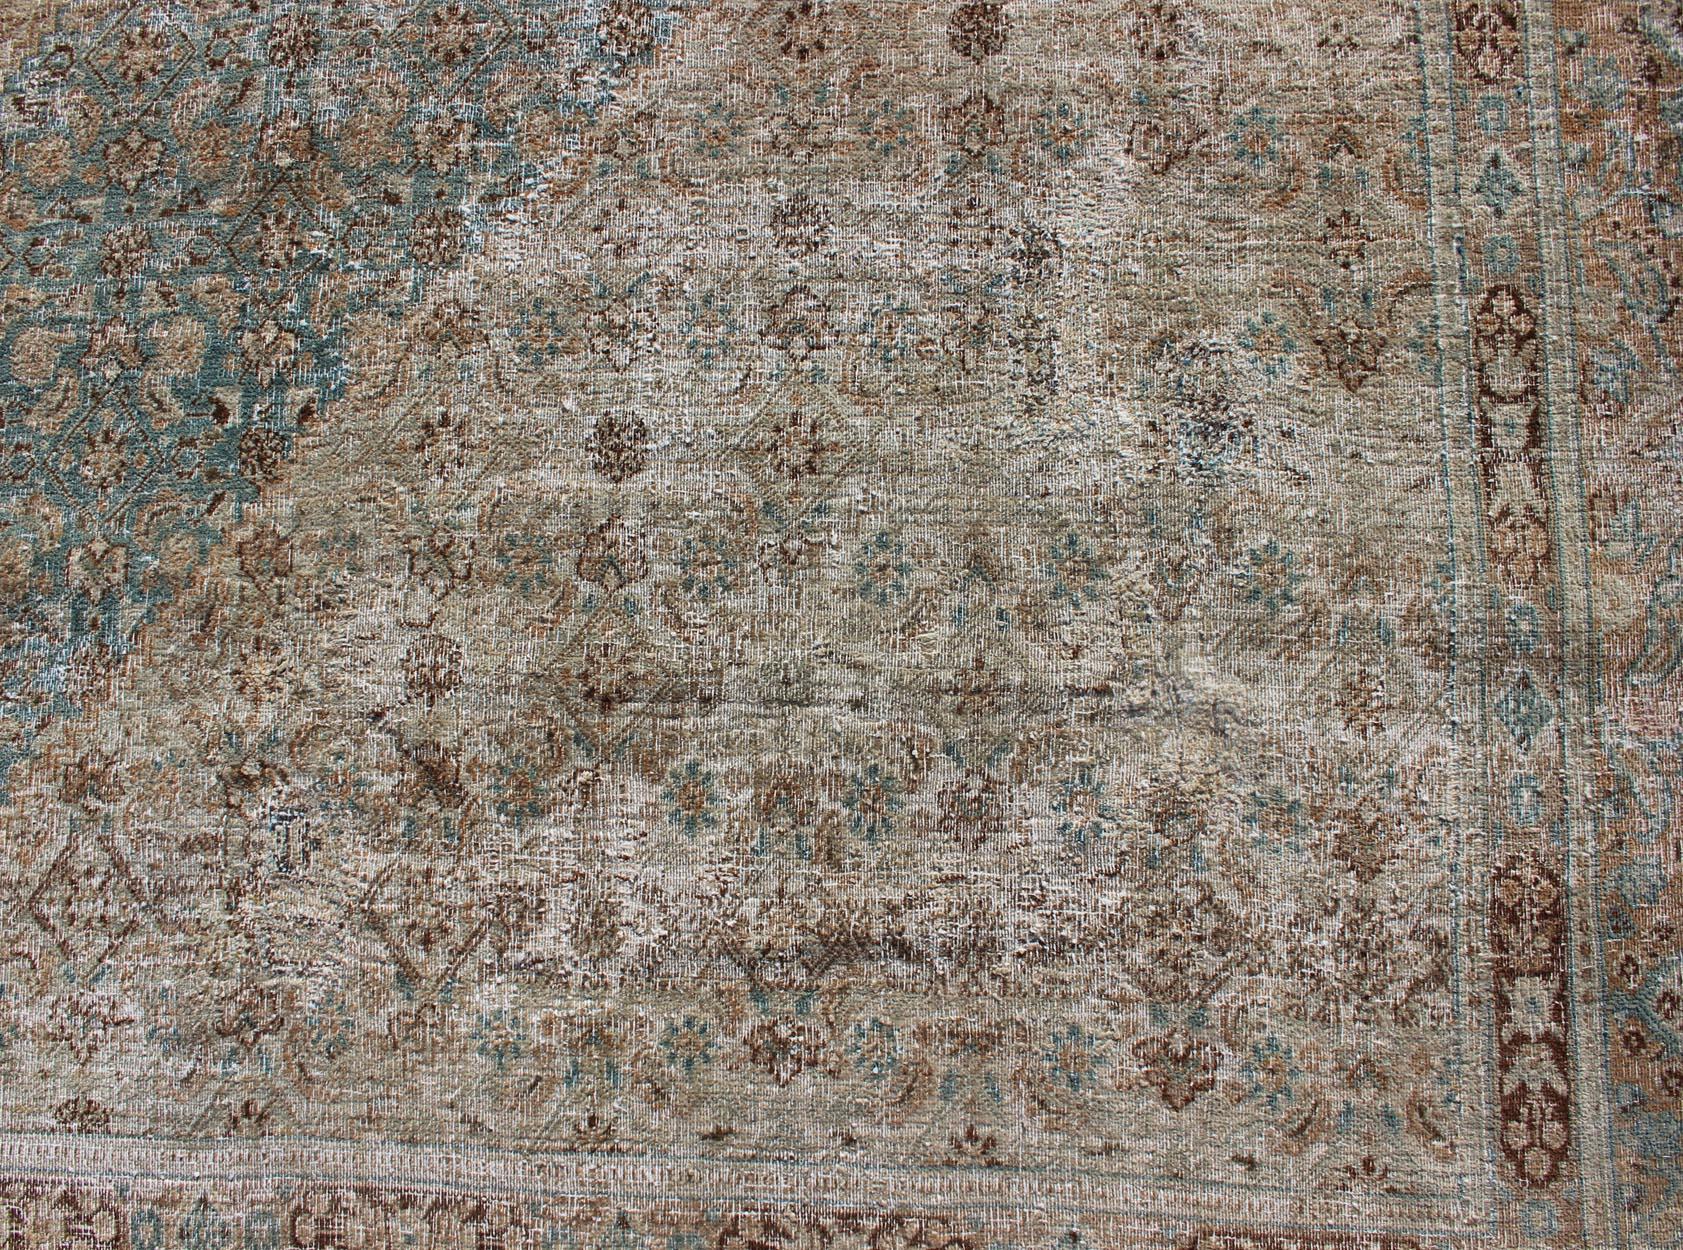 Wool Antique Persian Khorassan Rug with a Geometric Diamond Design in Teal and Brown For Sale